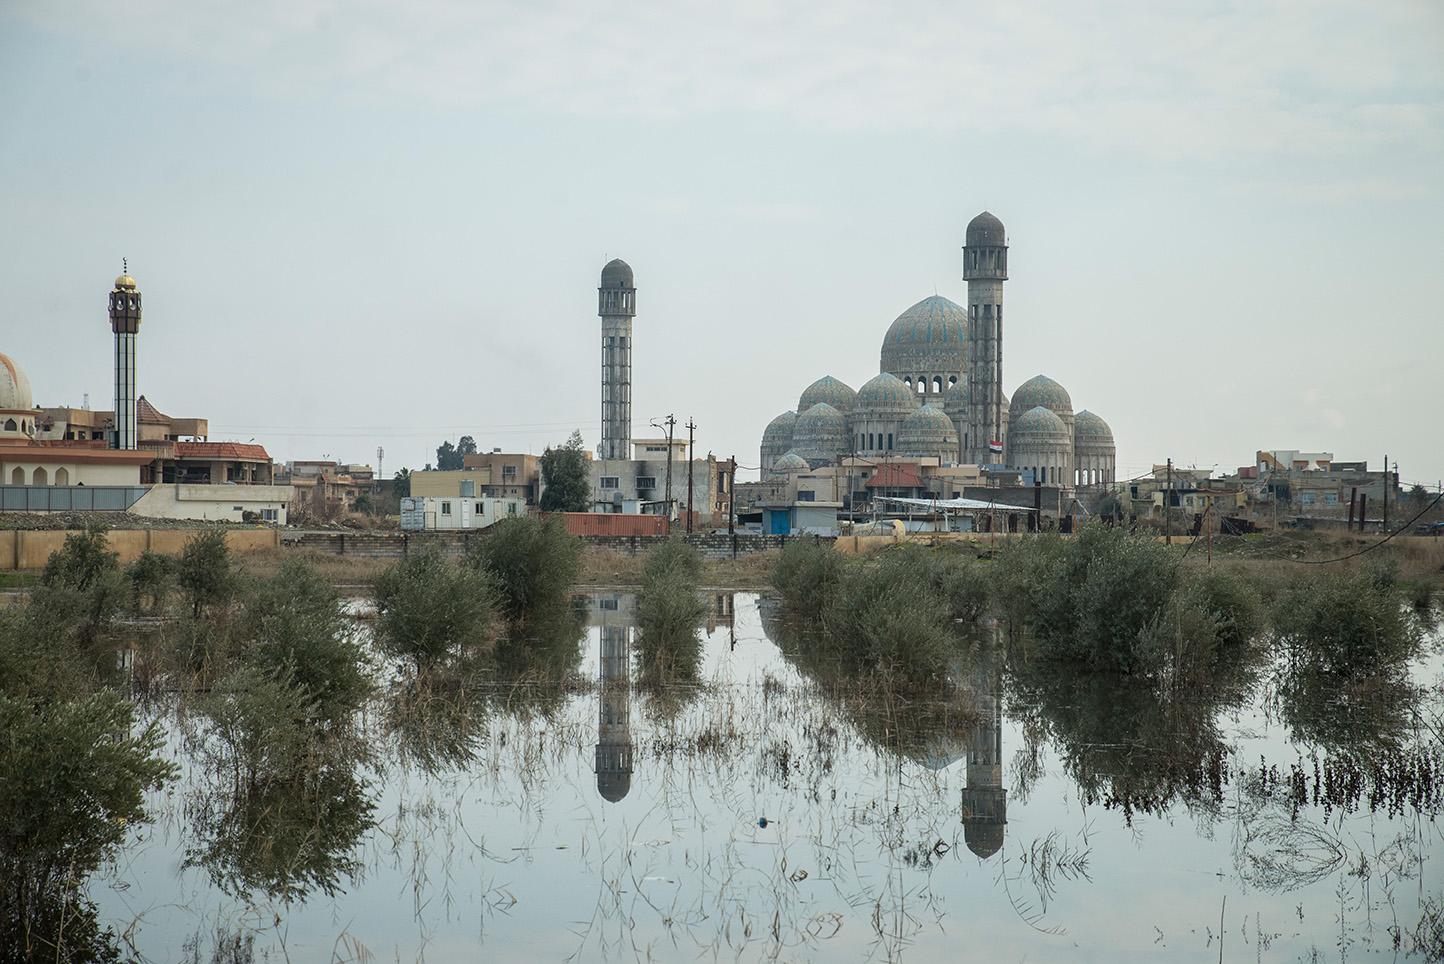 The Impact of ISIS in Iraq - Mosul, Iraq. The Great Mosque of Mosul, a Sunni mosque...